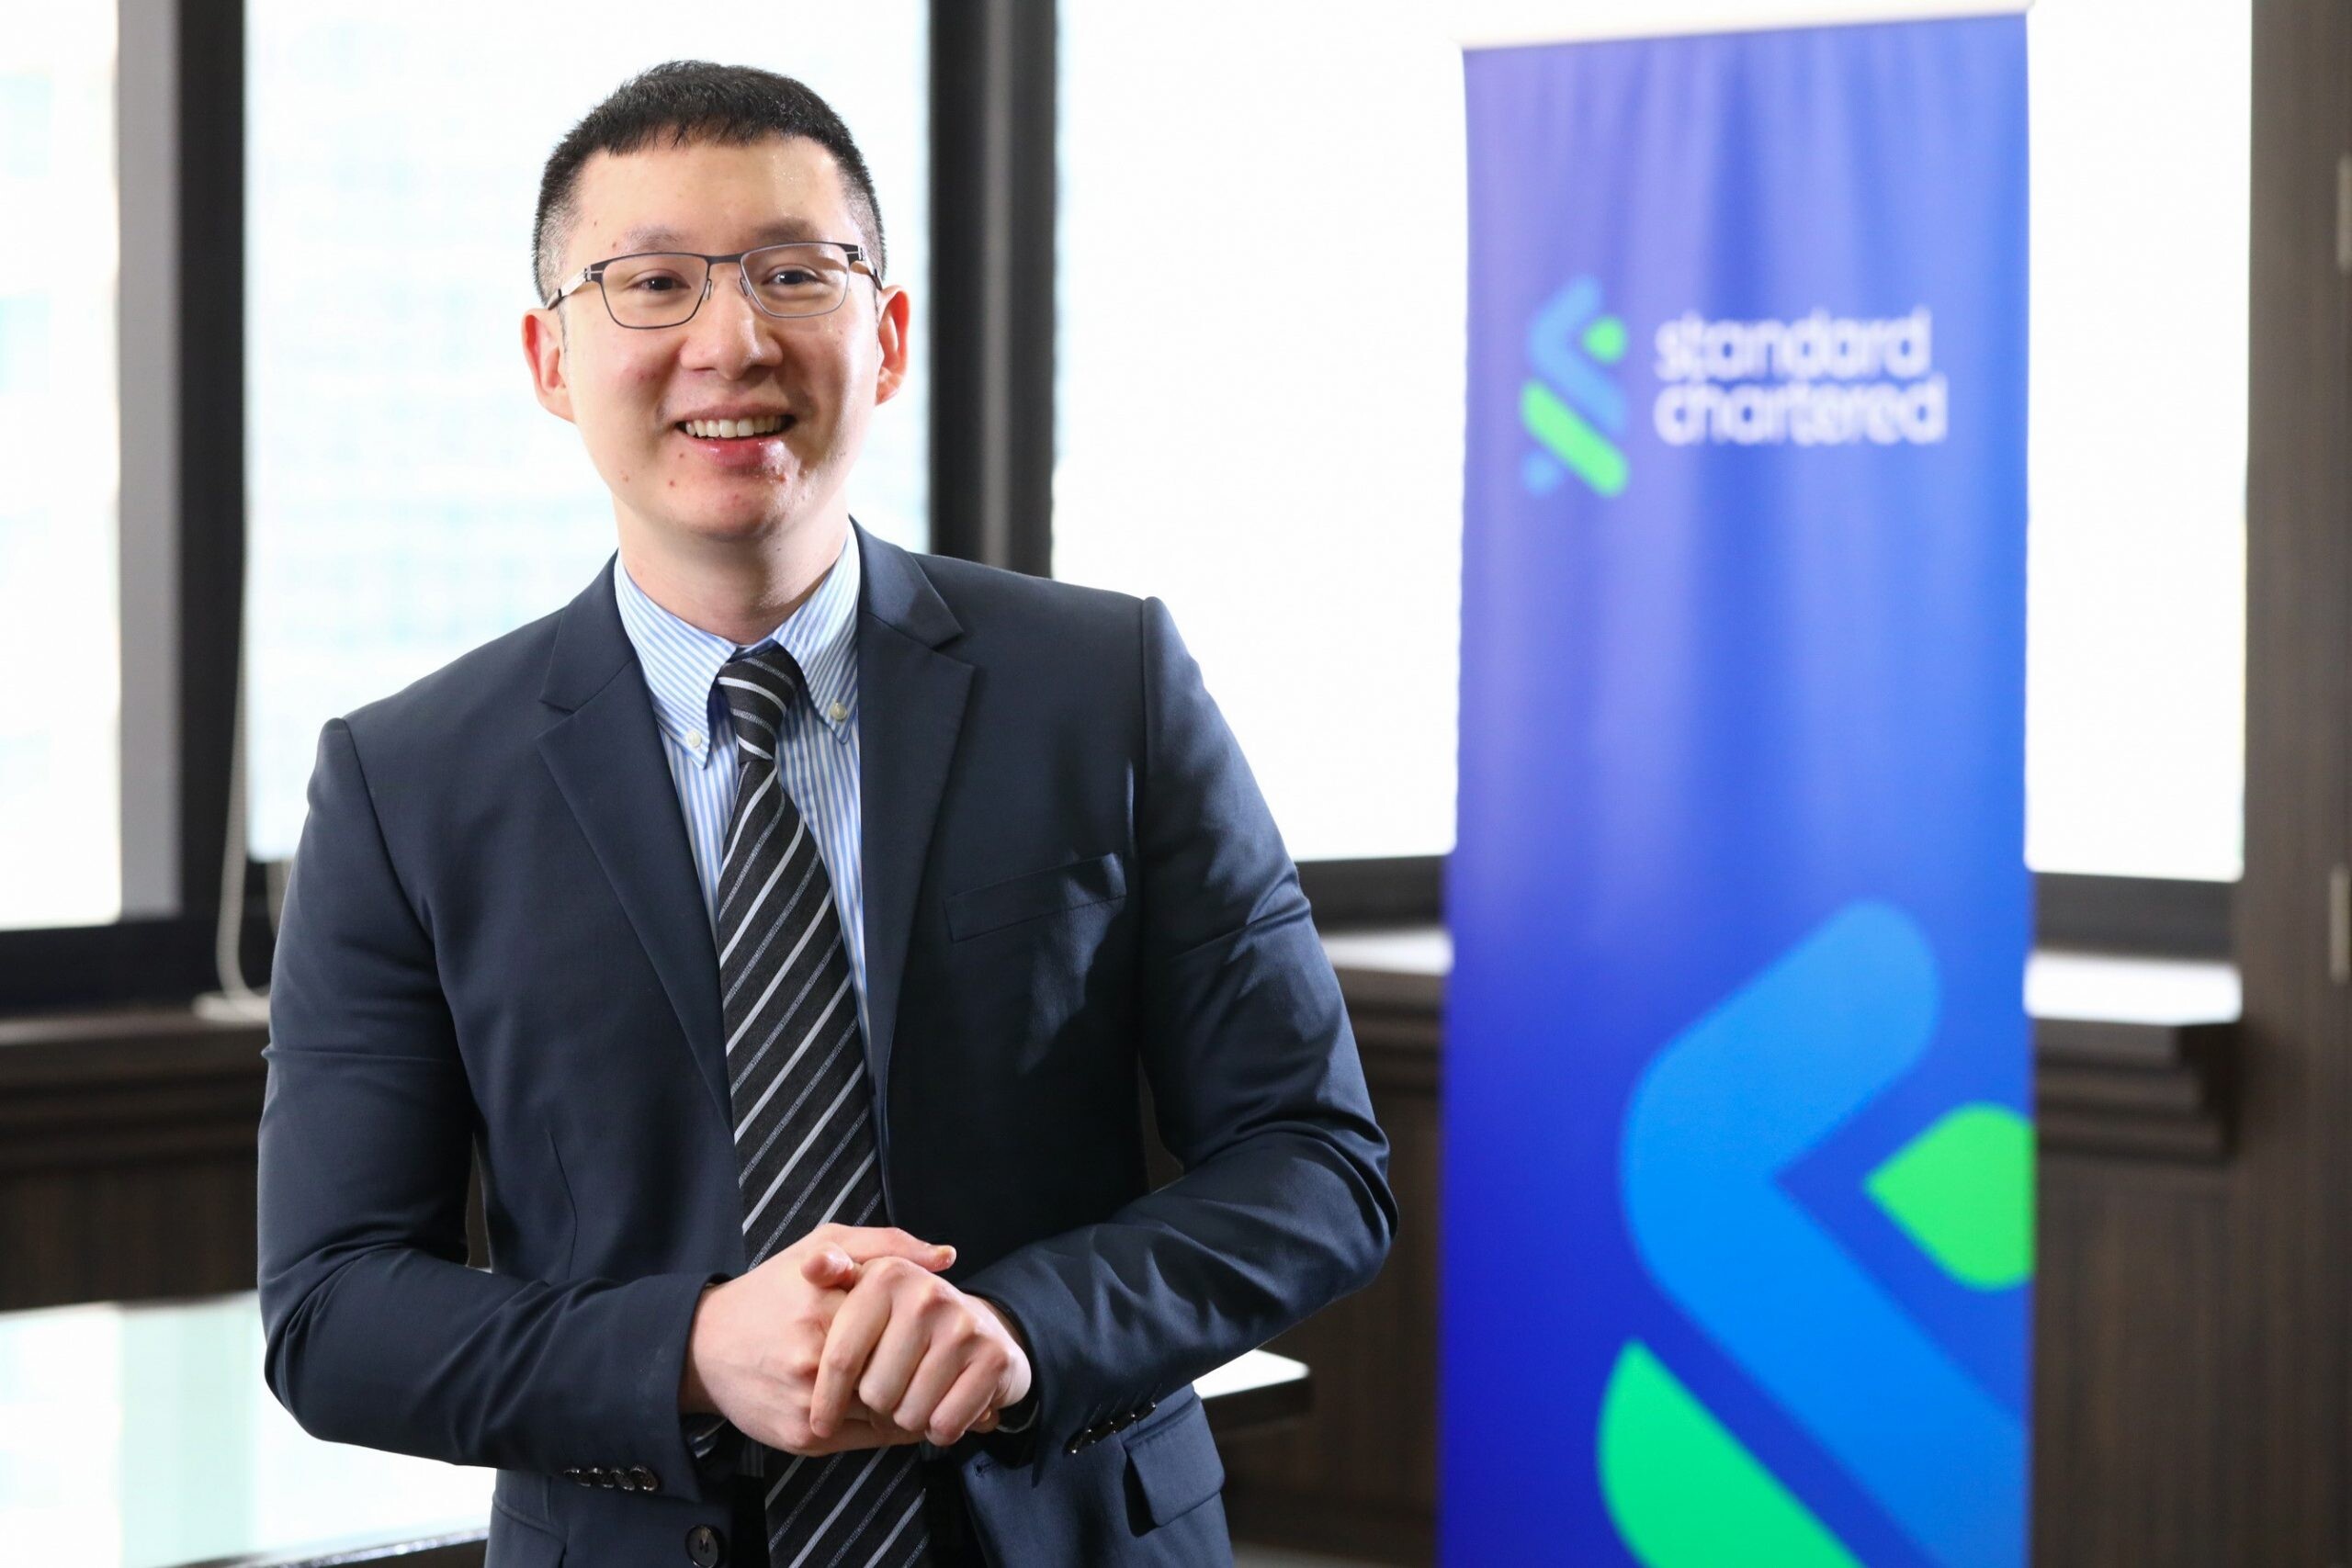 Standard Chartered Bank: Thailand's Mild Economic Recovery amid Volatile Market